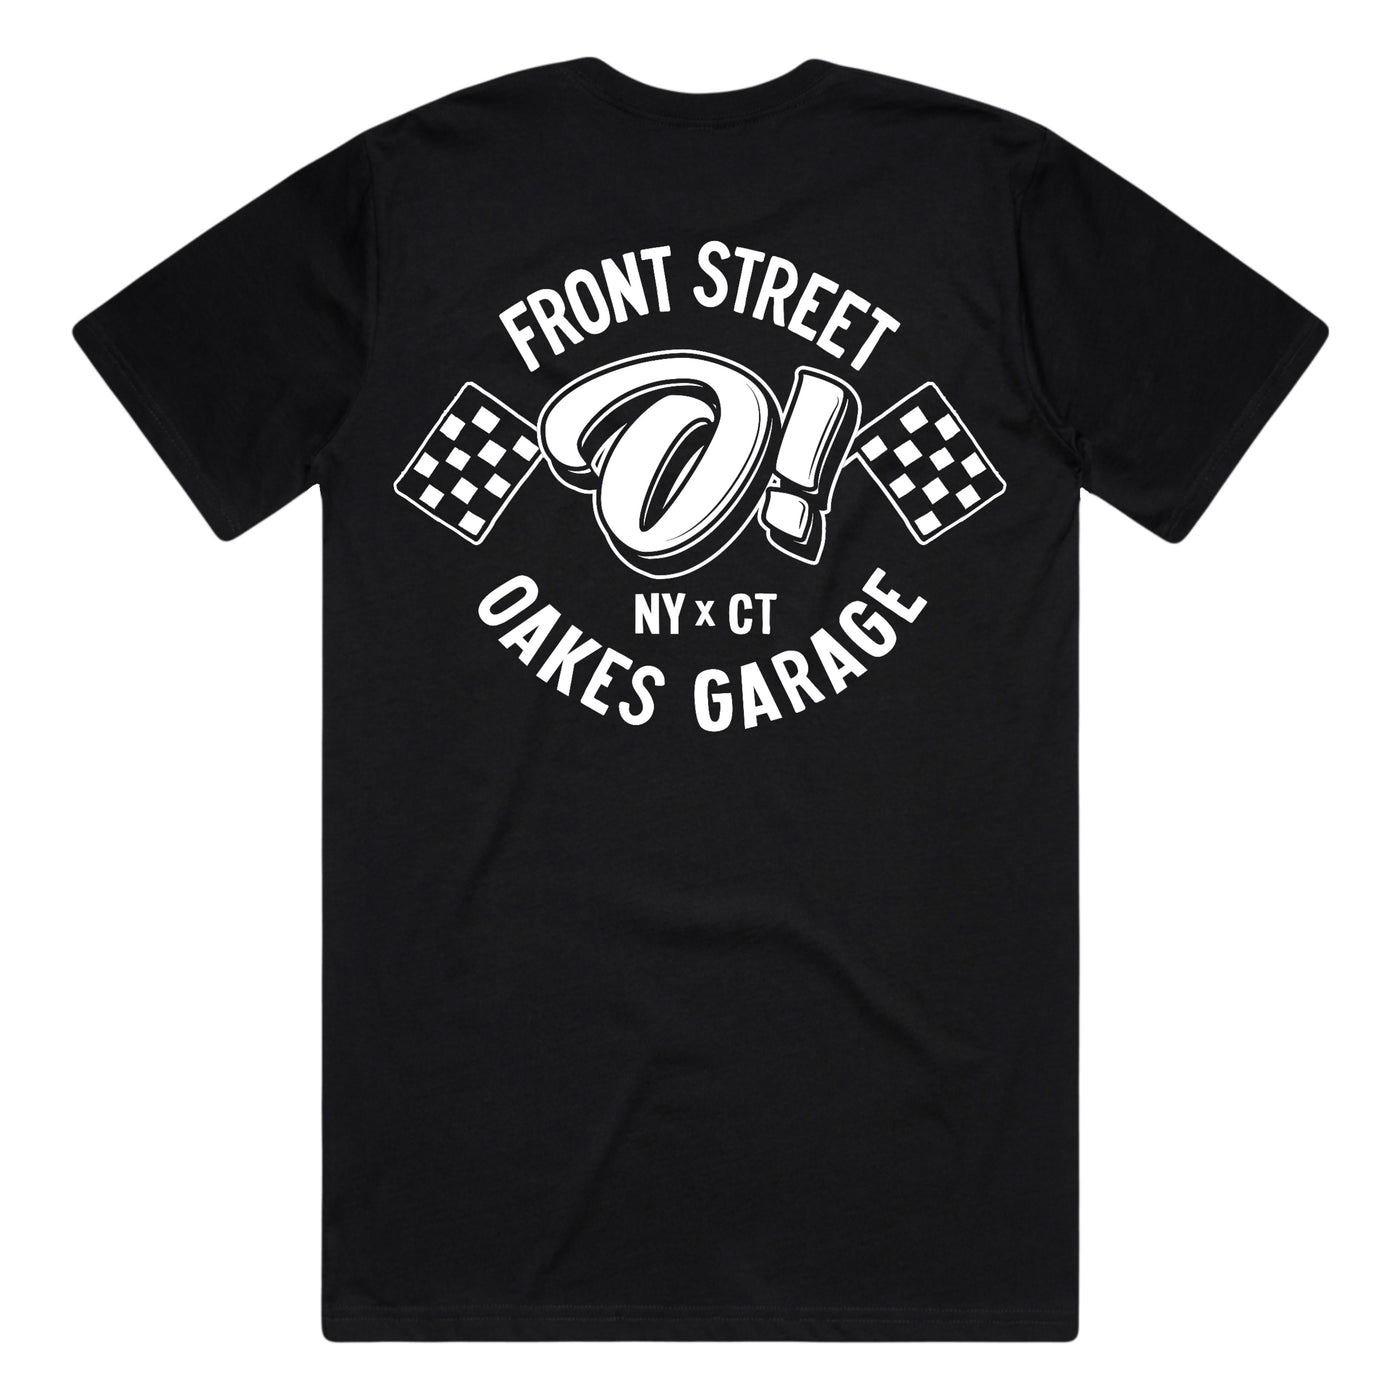 Oakes X Front Street Collab Tee